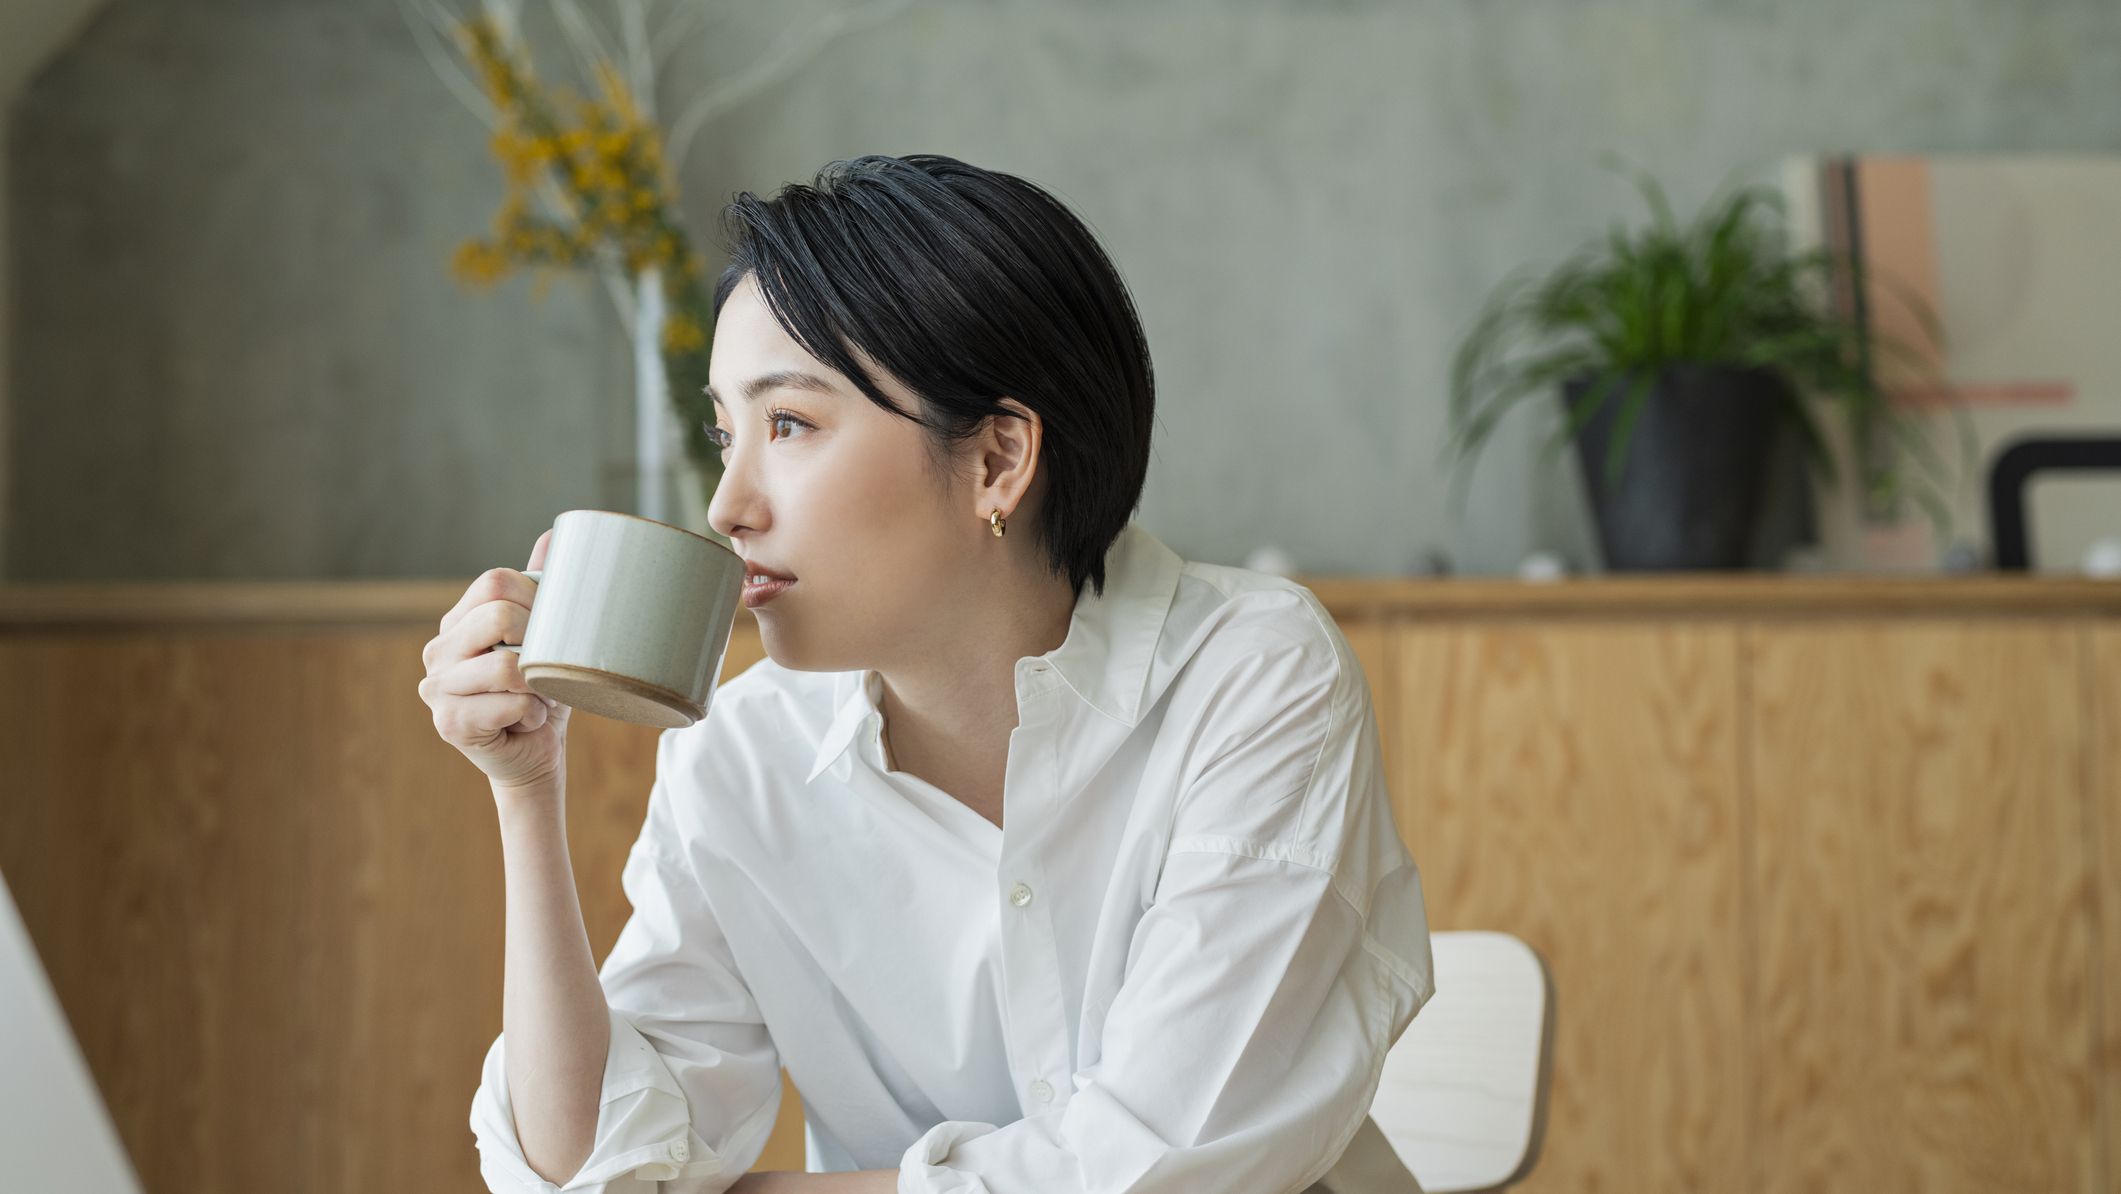 https://hips.hearstapps.com/hmg-prod/images/woman-drinking-coffee-while-working-remotely-royalty-free-image-1647375294.jpg?crop=1xw:0.84415xh;center,top